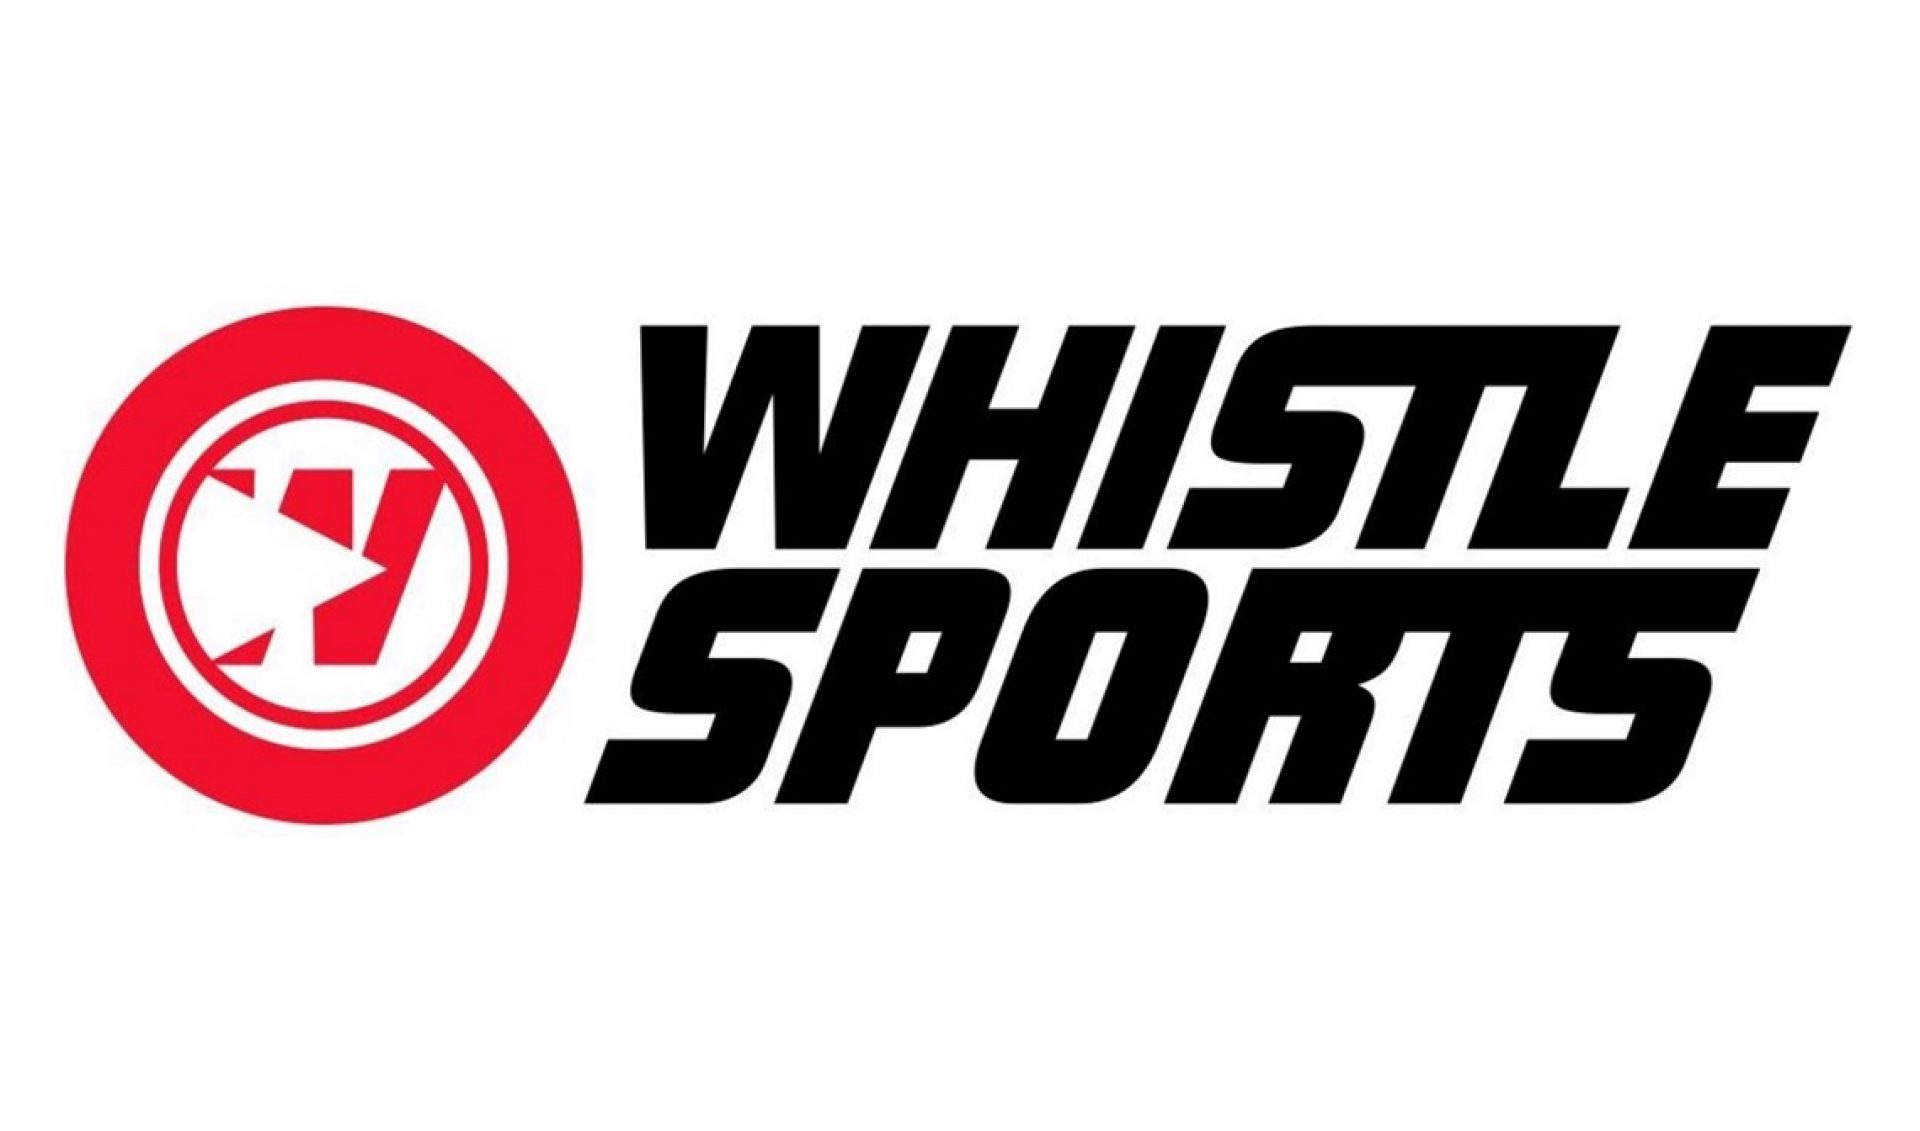 Whistle Sports Announces $20 Million In Funding From NBC Sports, Tegna, And More